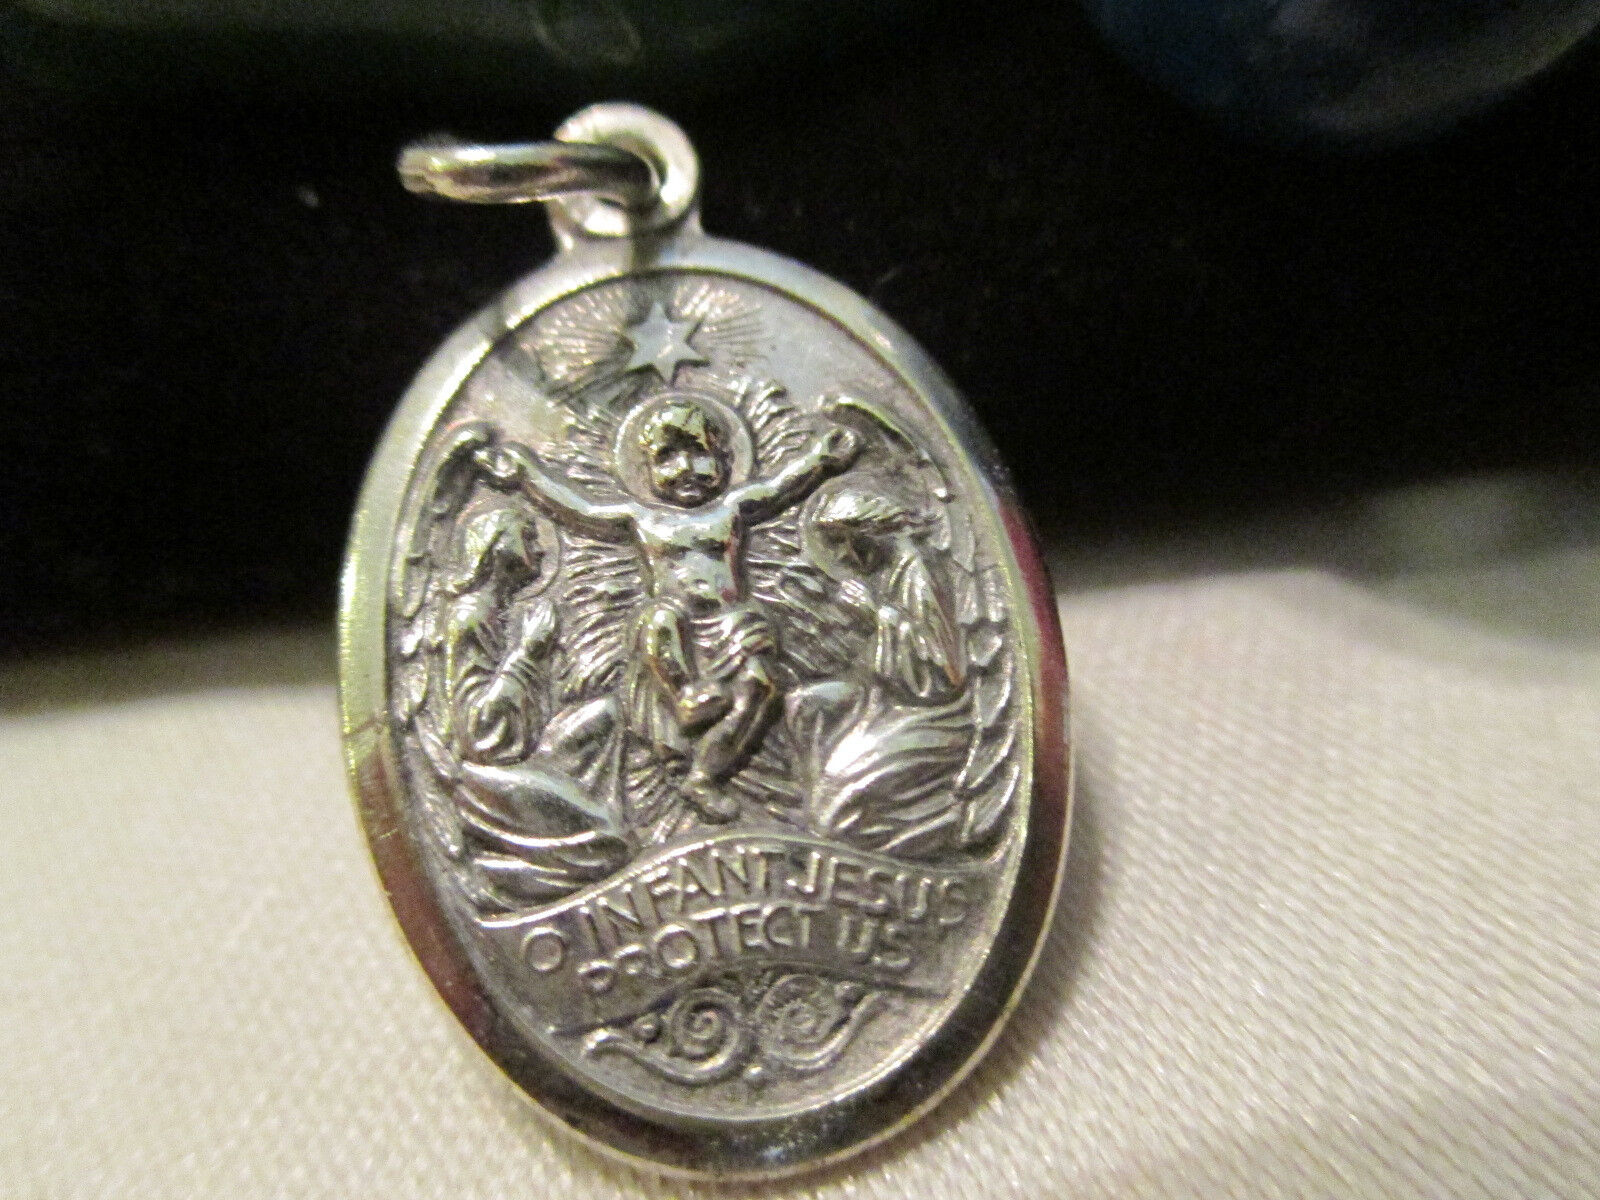 Vtg. INFANT JESUS PROTECT US Silver Medal ~Bishops Committee Diocese BUFFALO